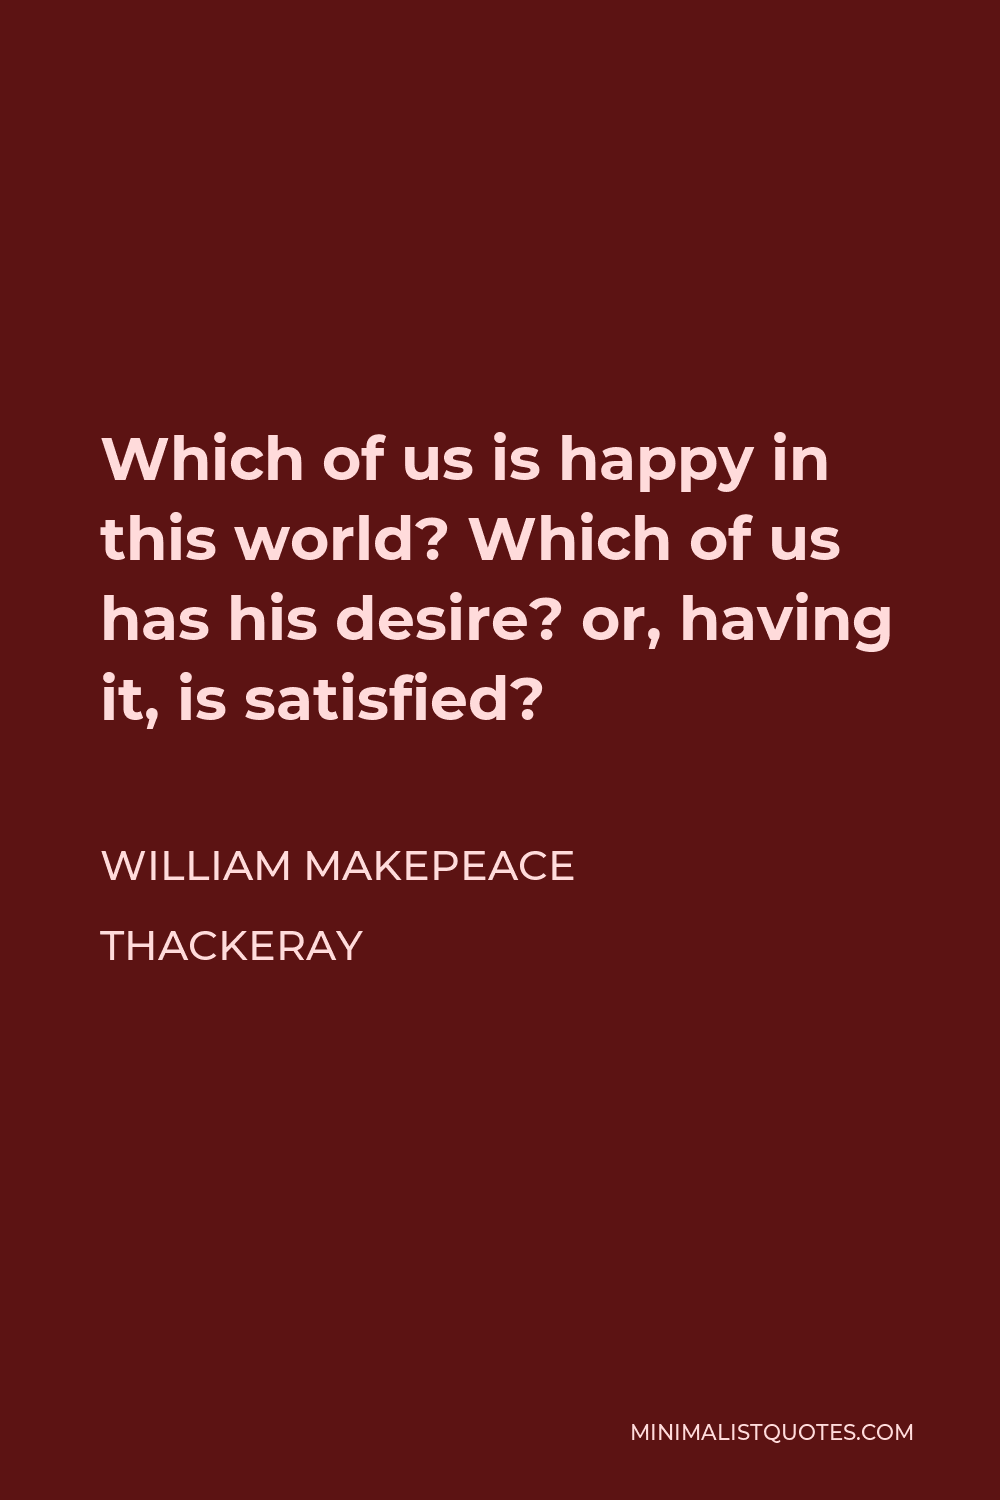 William Makepeace Thackeray Quote - Which of us is happy in this world? Which of us has his desire? or, having it, is satisfied?